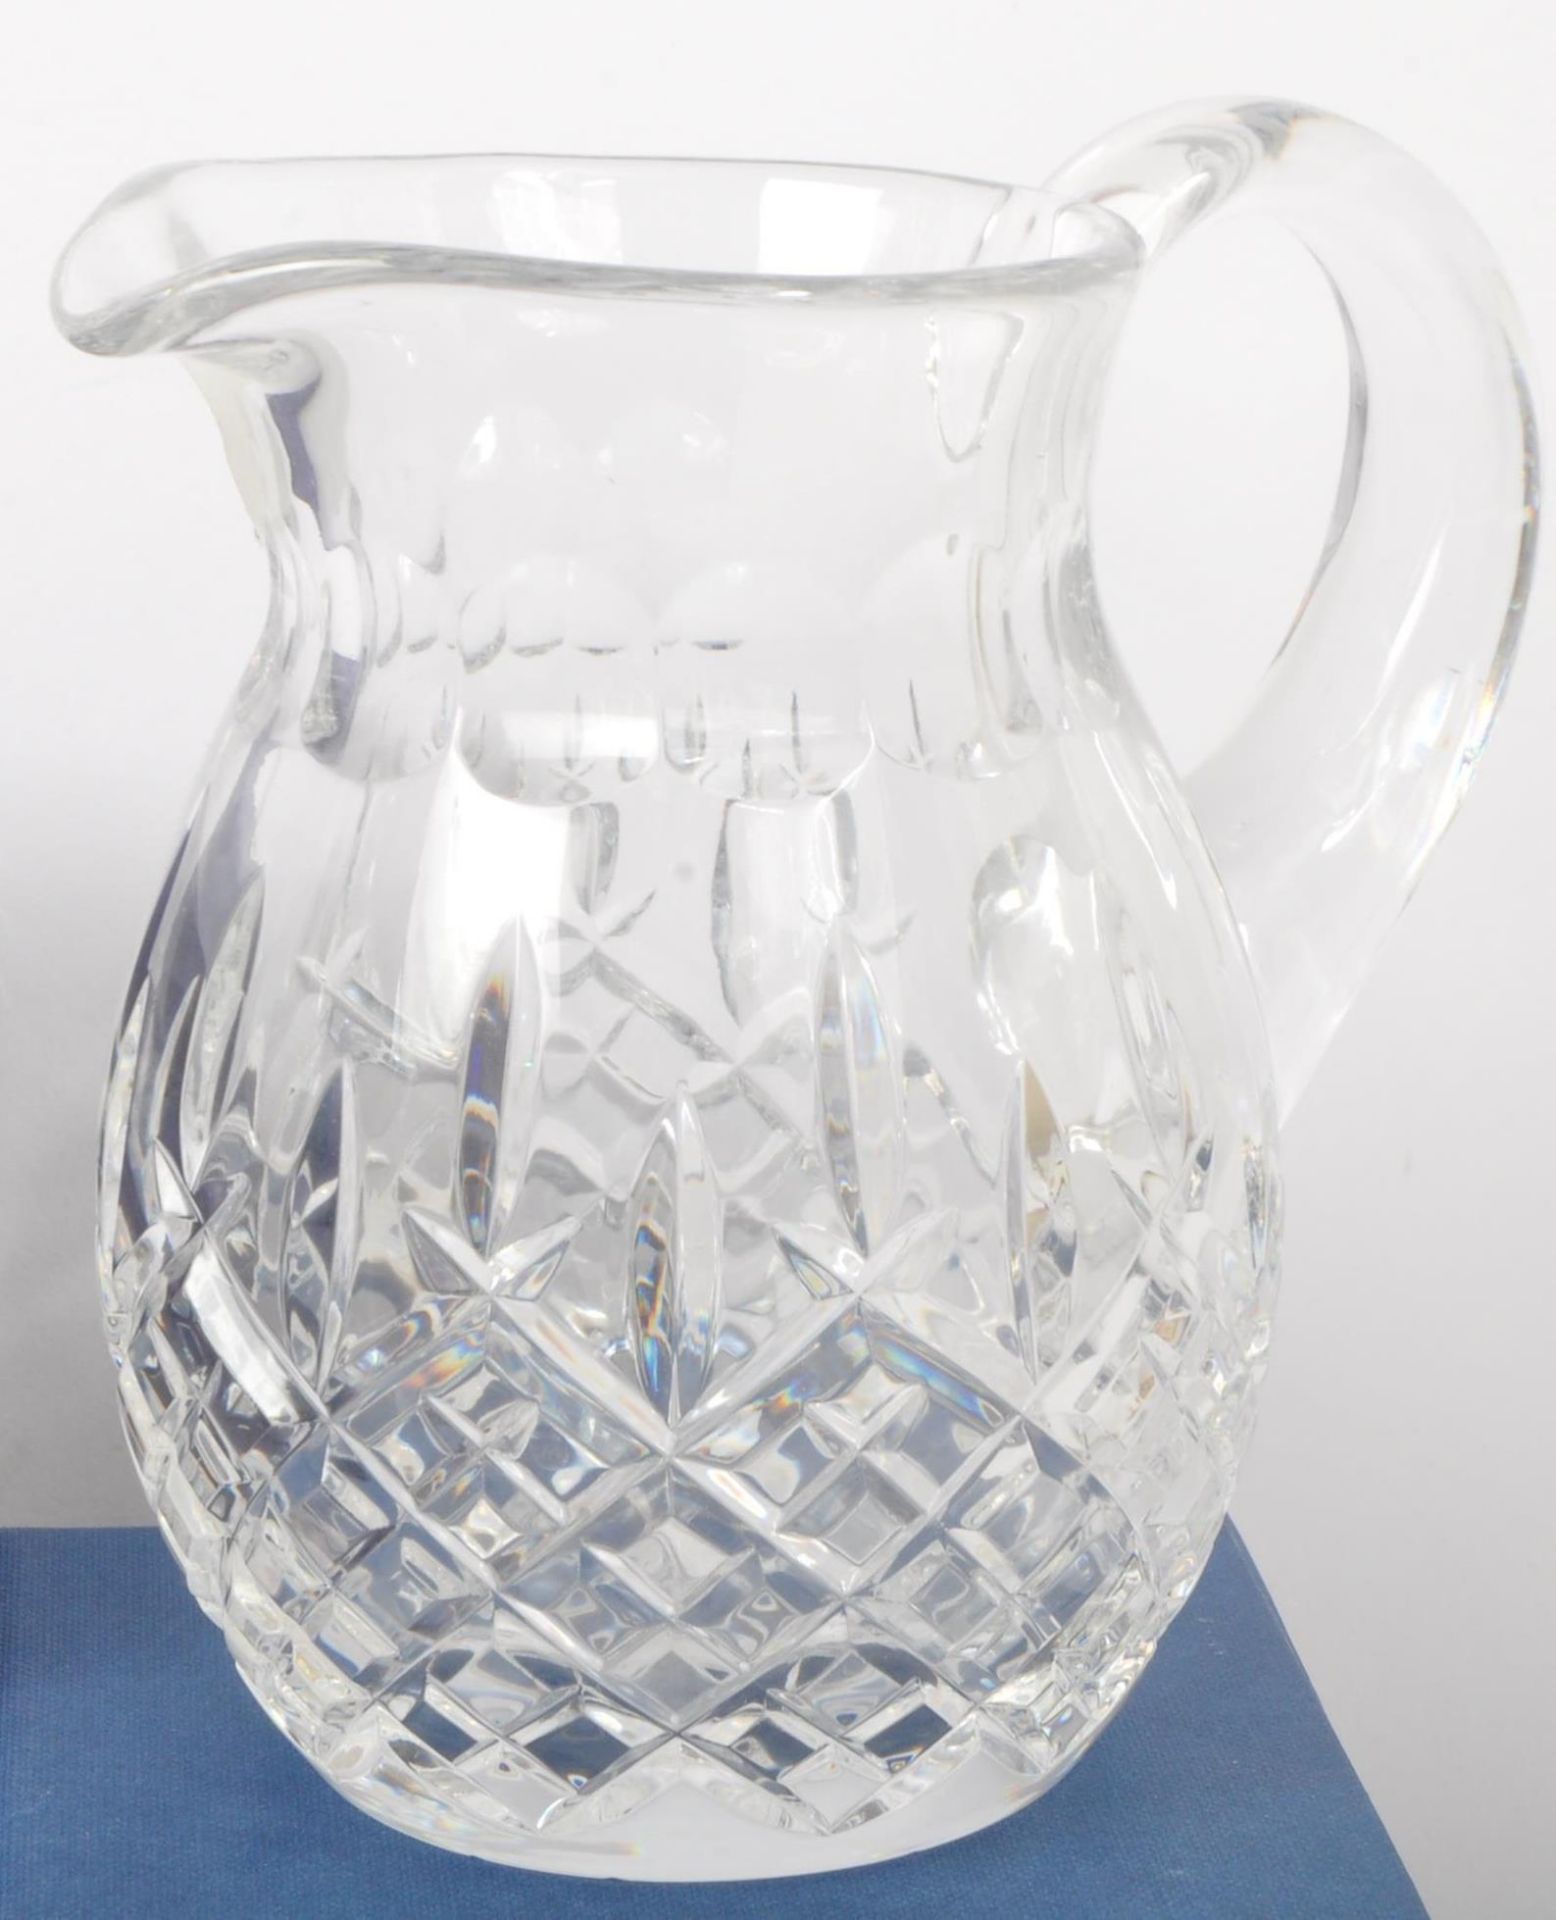 ROYAL SCOT HAND CRAFTED CRYSTAL GLASSWARE - NEW OLD STOCK - Image 3 of 5